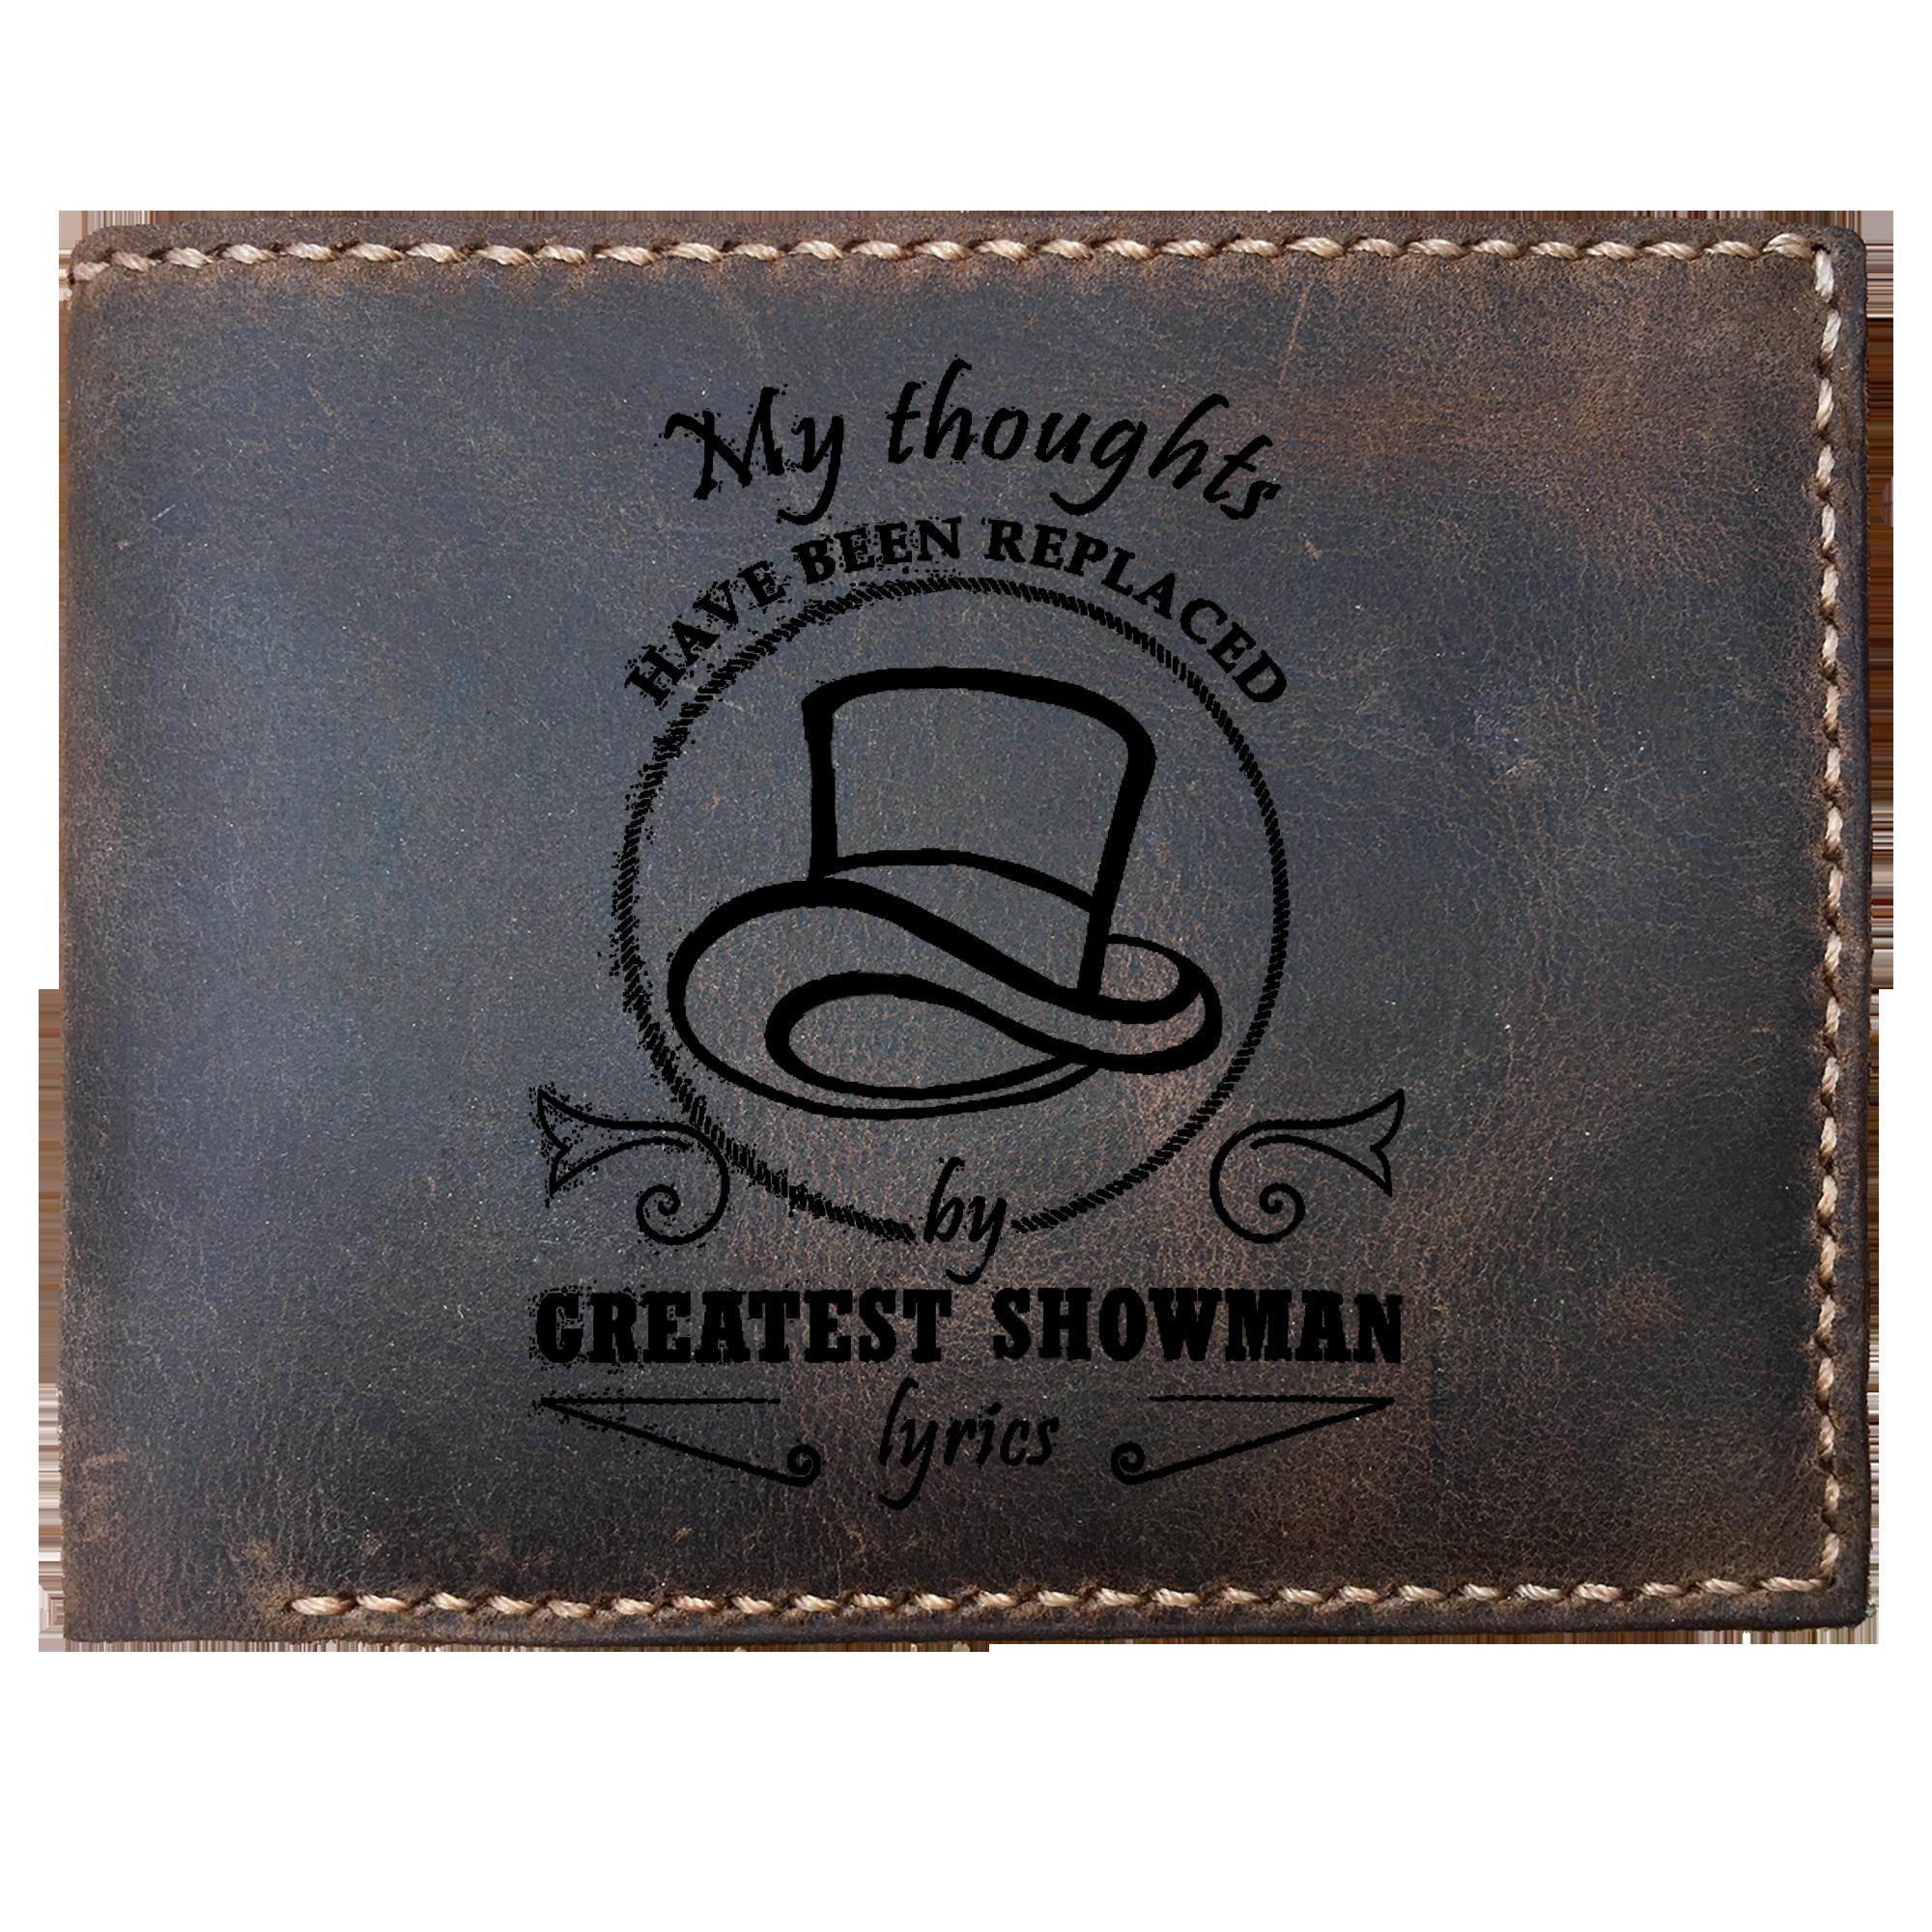 Skitongifts Funny Custom Laser Engraved Bifold Leather Wallet For Men, My Thoughts Have Been Replaced By Greatest Showman Lyrics Funny